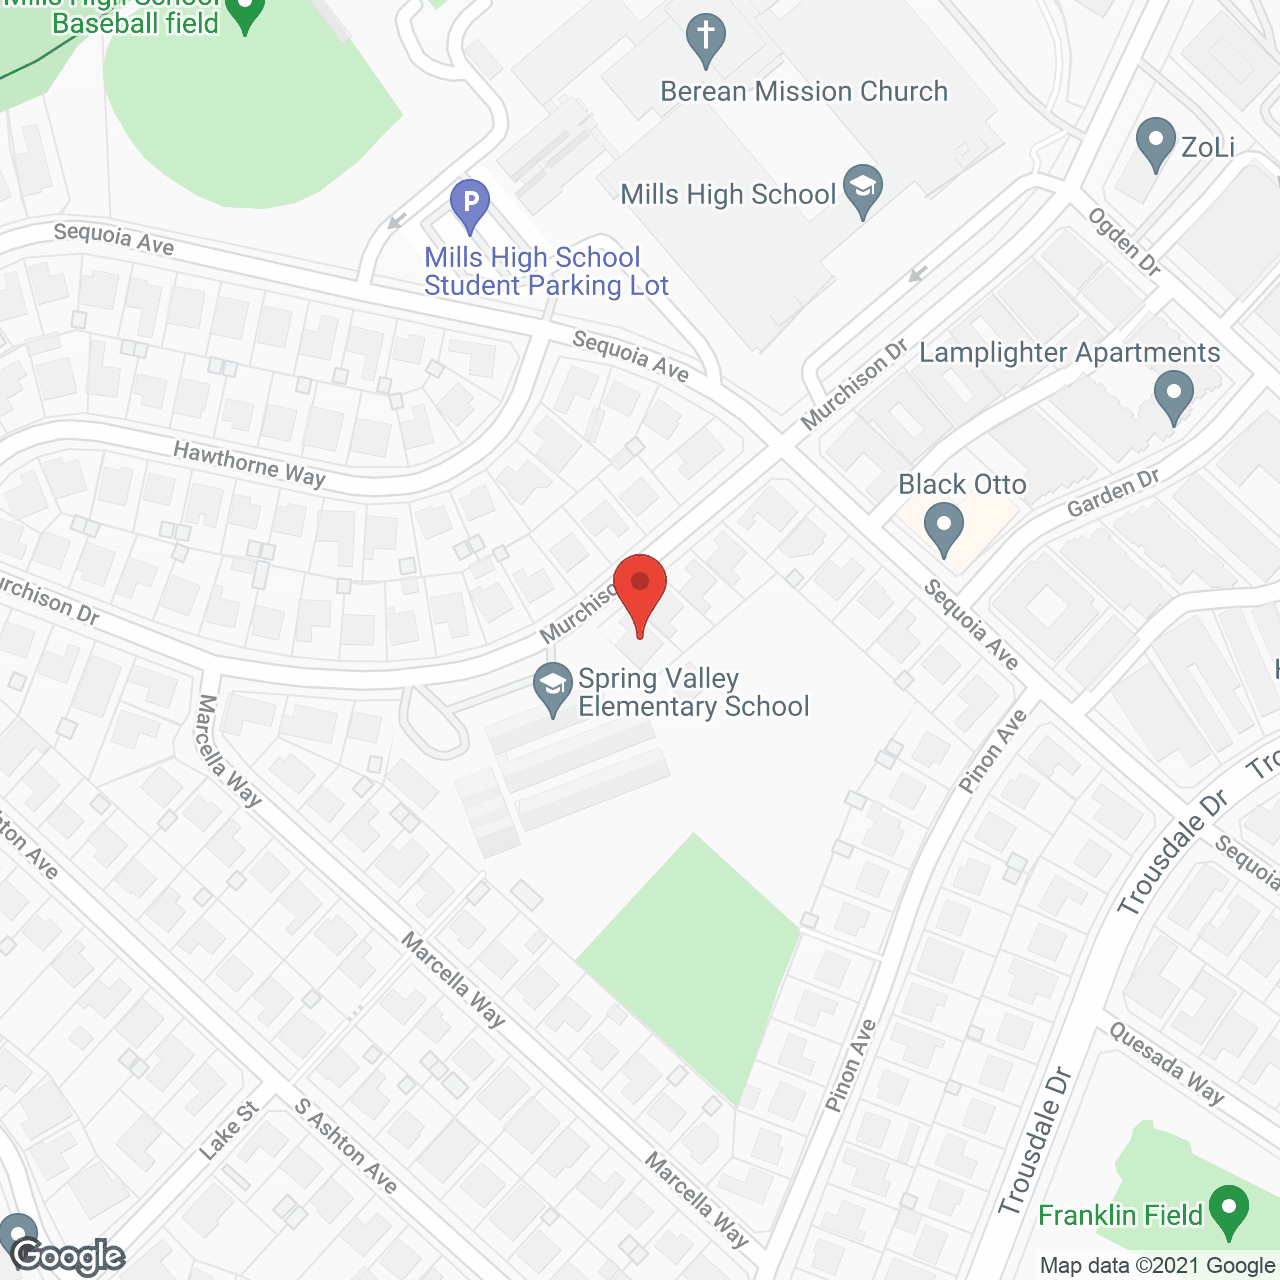 Millbrae Board and Care Home in google map